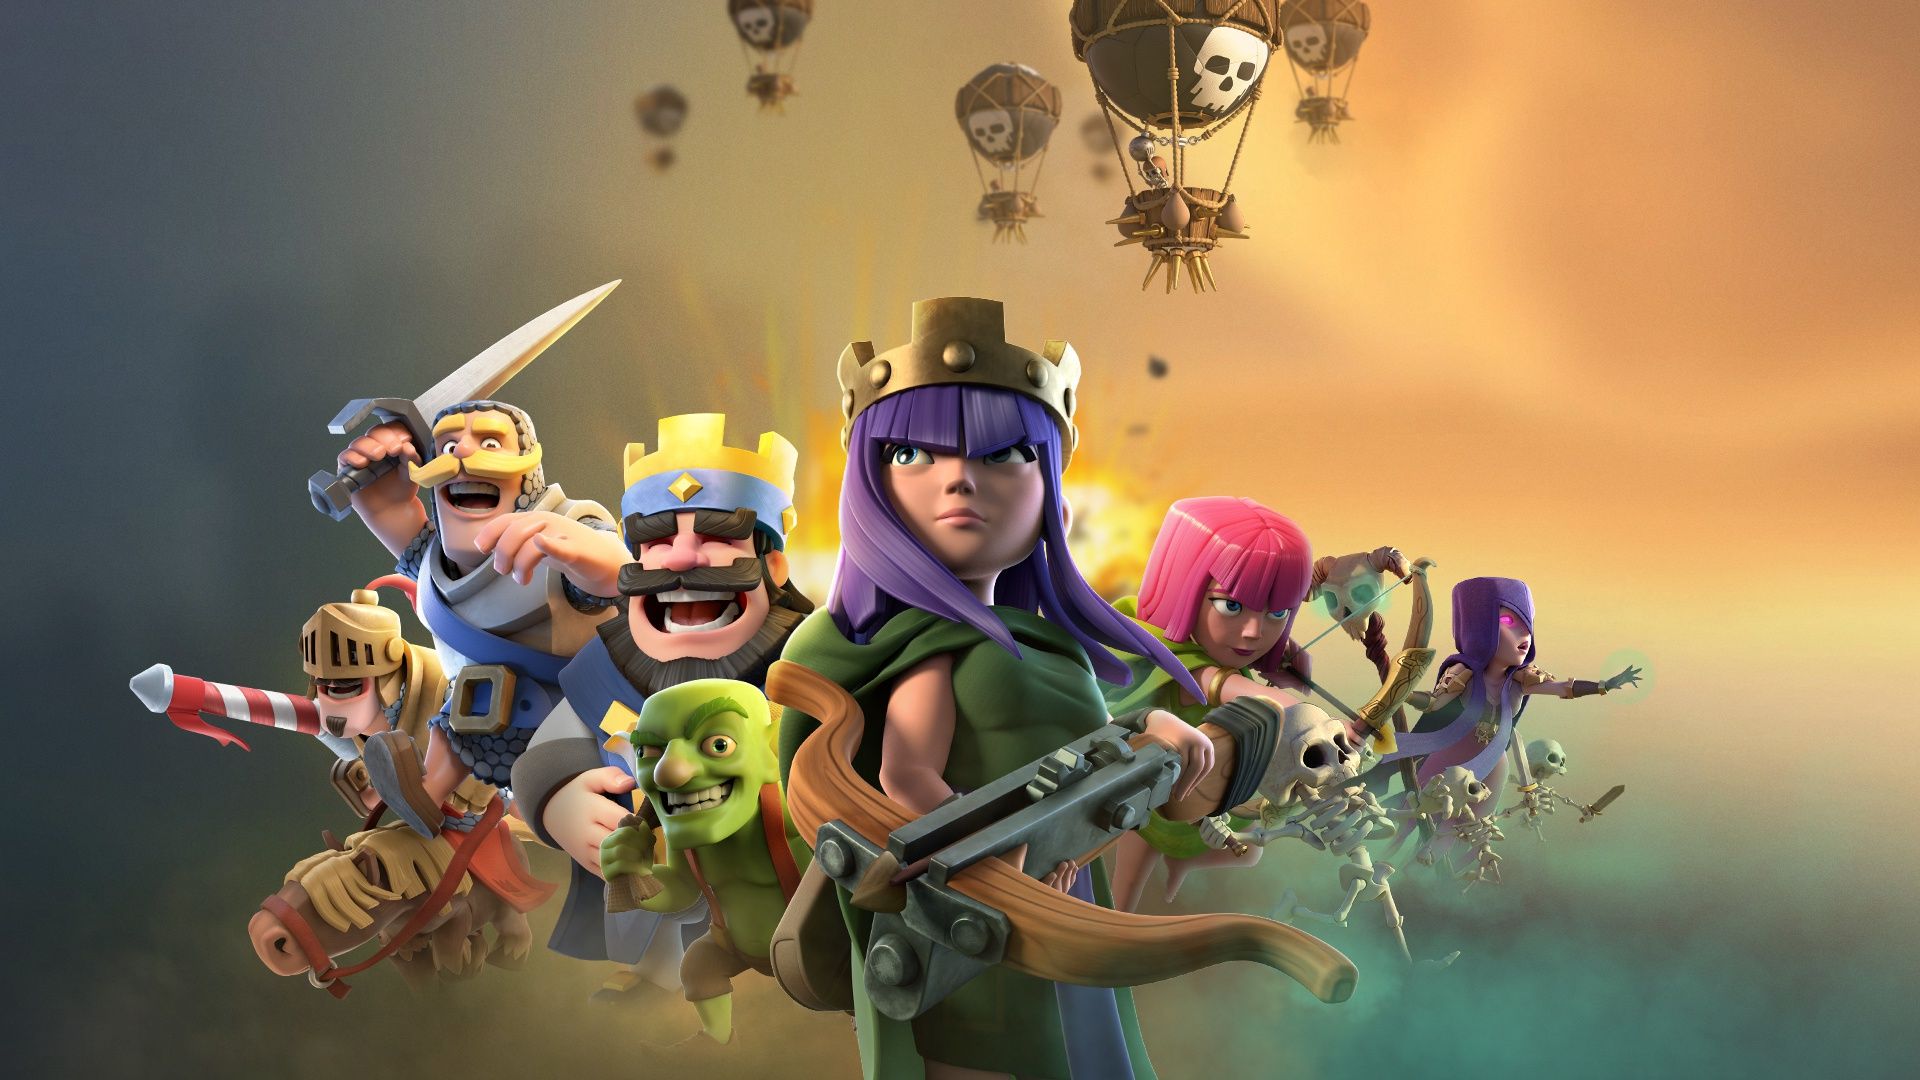 Desktop Wallpaper Clash Of Clans, Mobile Game, Archer, Barbarian Army, HD Image, Picture, Background, X9oytq